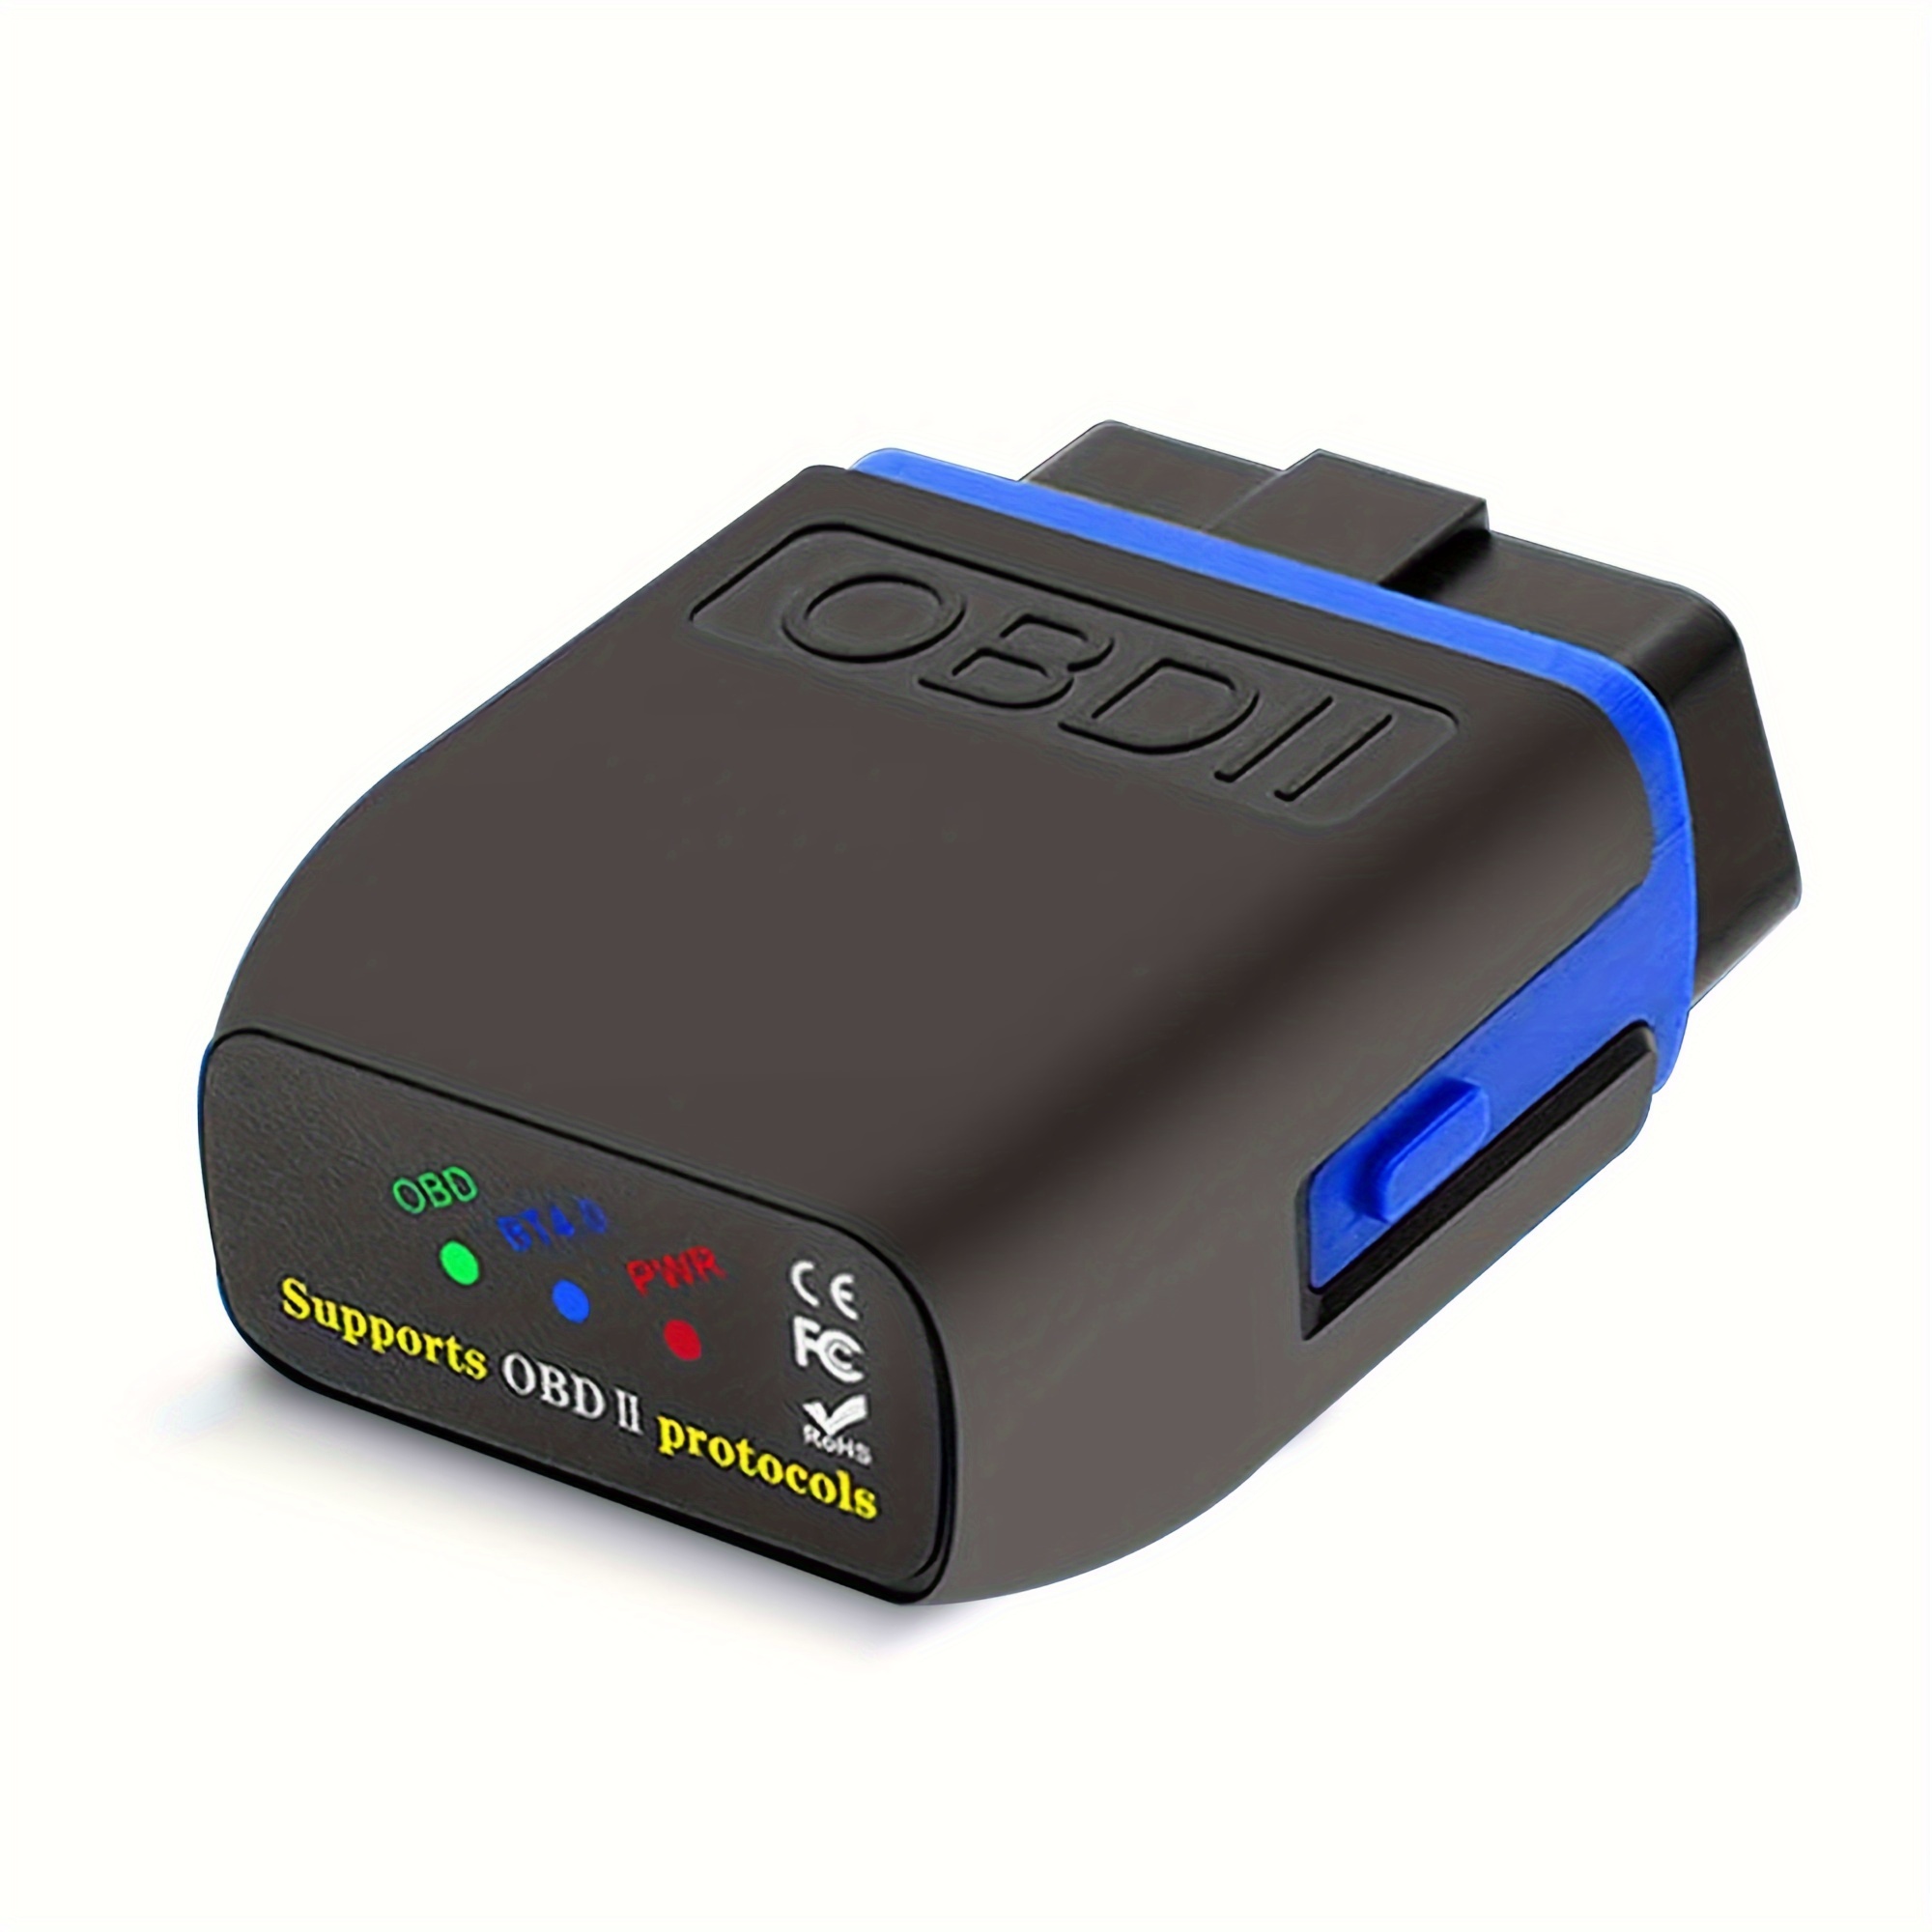  OBD2 Bluetooth 4.0 Scanner Car Code Reader for iPhone iOS  Android Windows, Auto ODB2 OBDII Adapter Diagnostic Scan Tool for Check  Engine Lights : Automotive